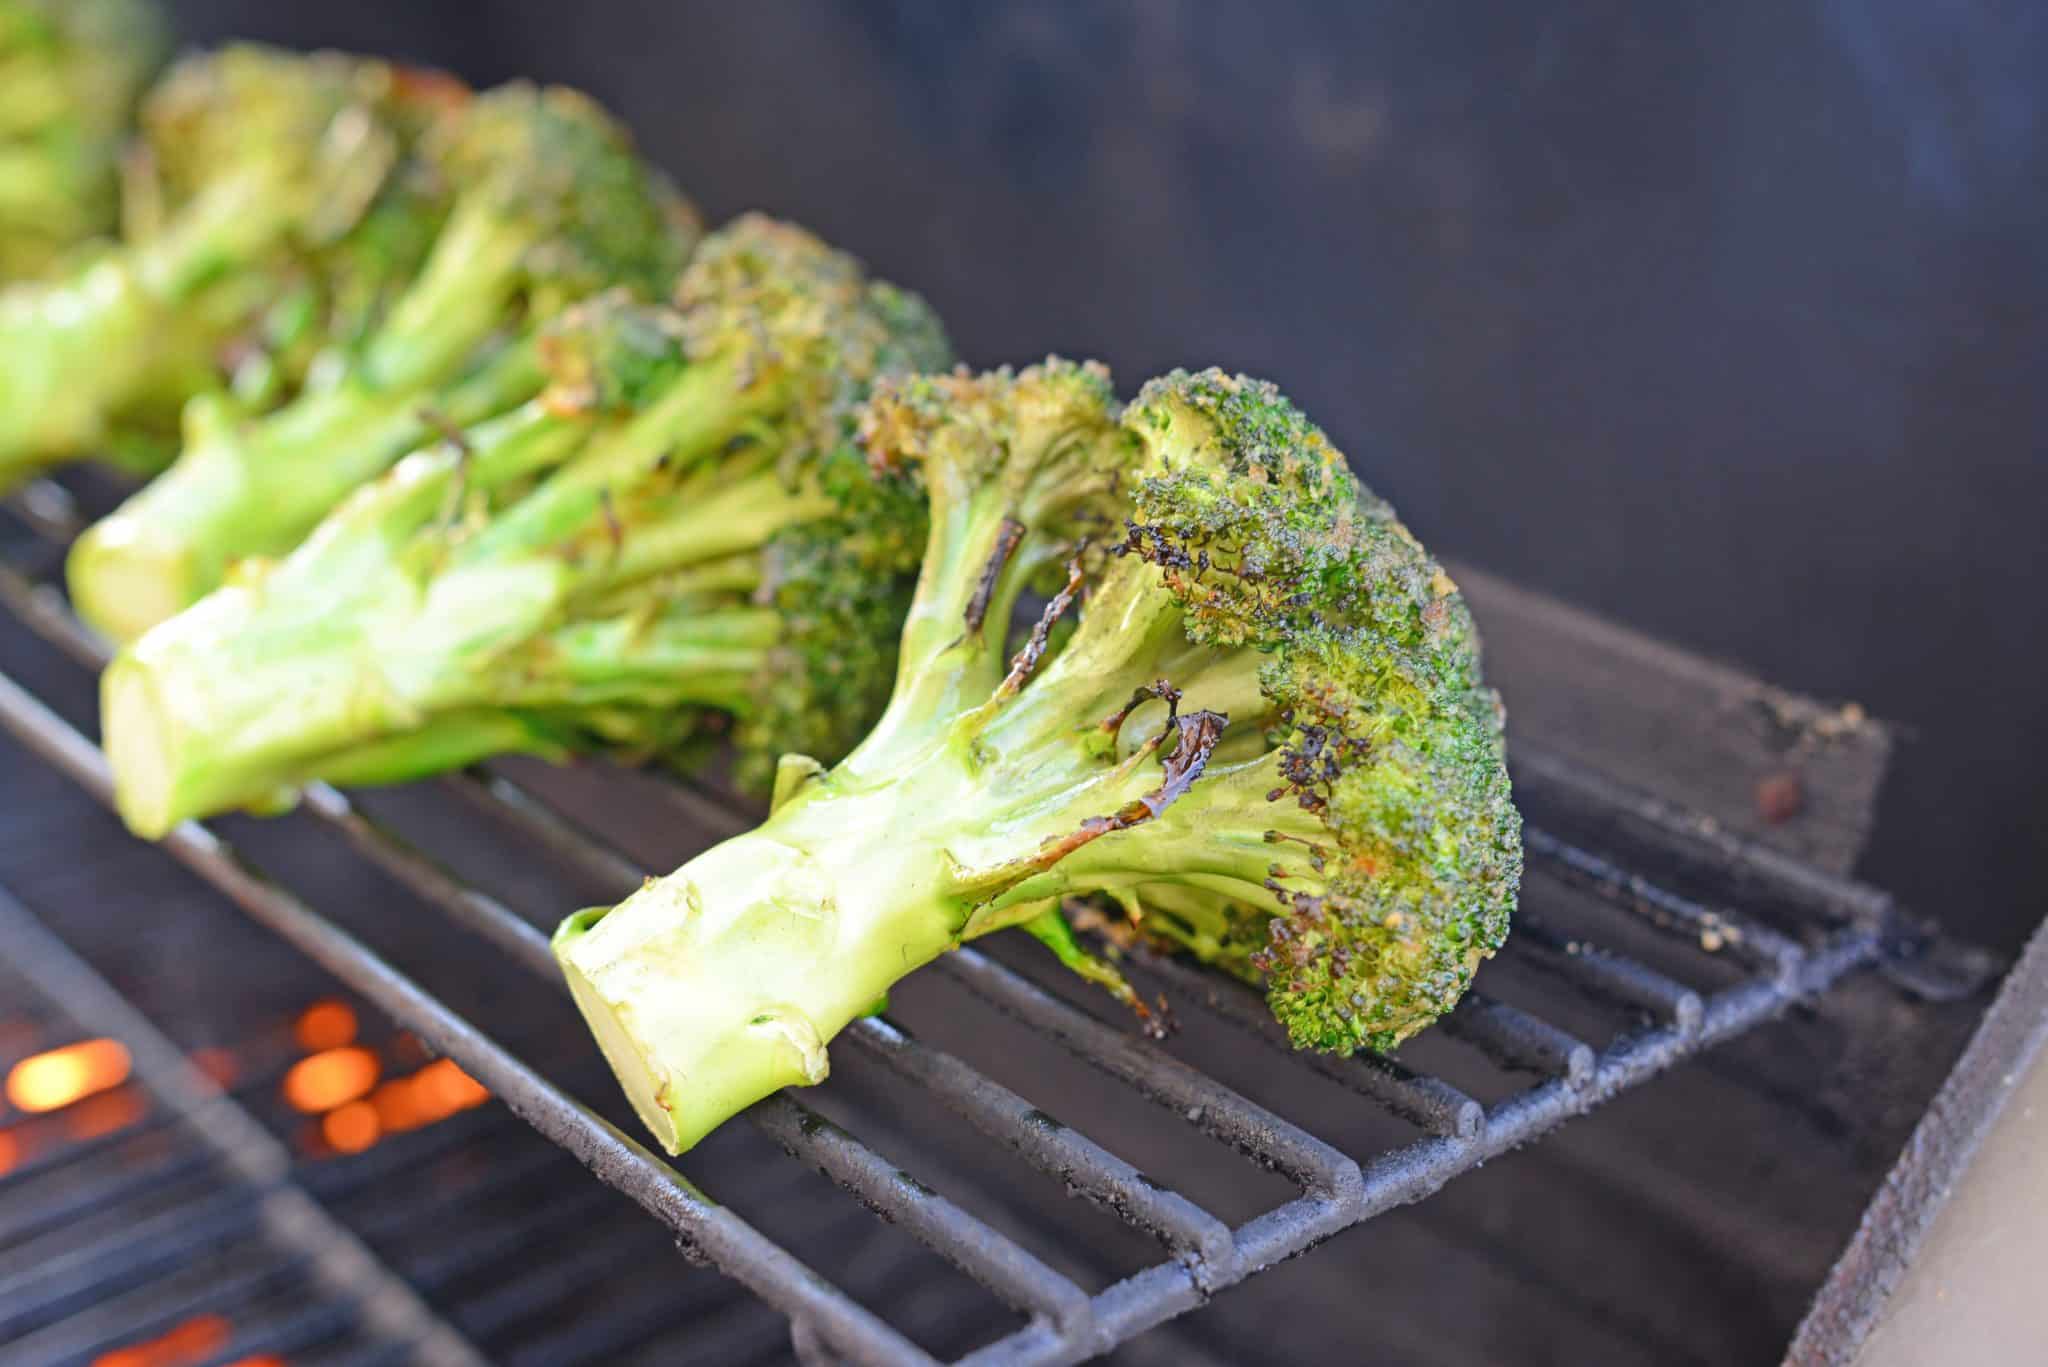 Garlic Grilled Broccoli is an excellent side dish for grilled meals. Marinate in a garlic and spice mix and then char on the grill for great flavor!